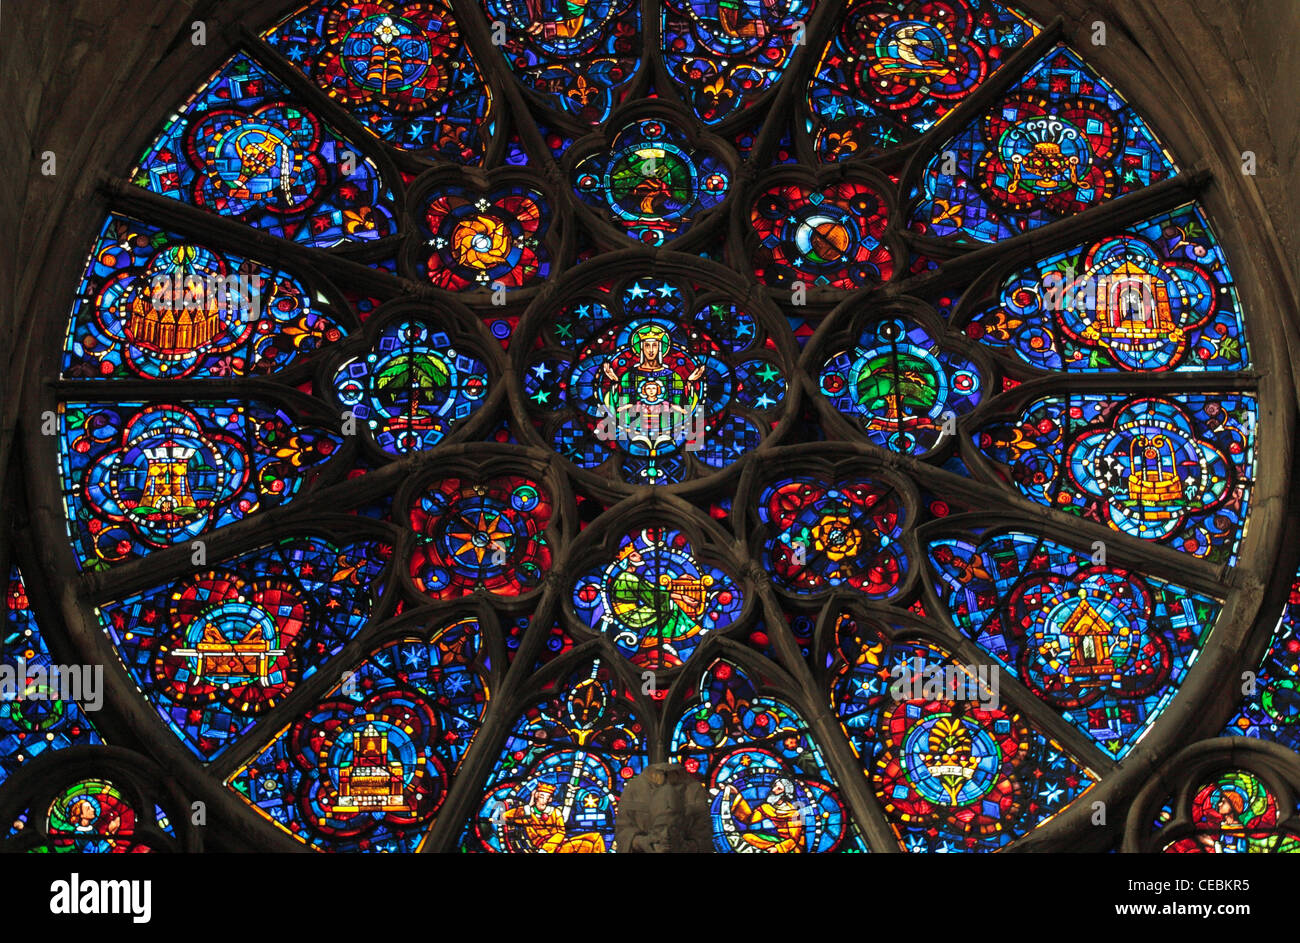 A stained glass window in the Cathedrale Notre Dame, Reims, France. (Notre-Dame de Reims (Our Lady of Rheims)). Stock Photo